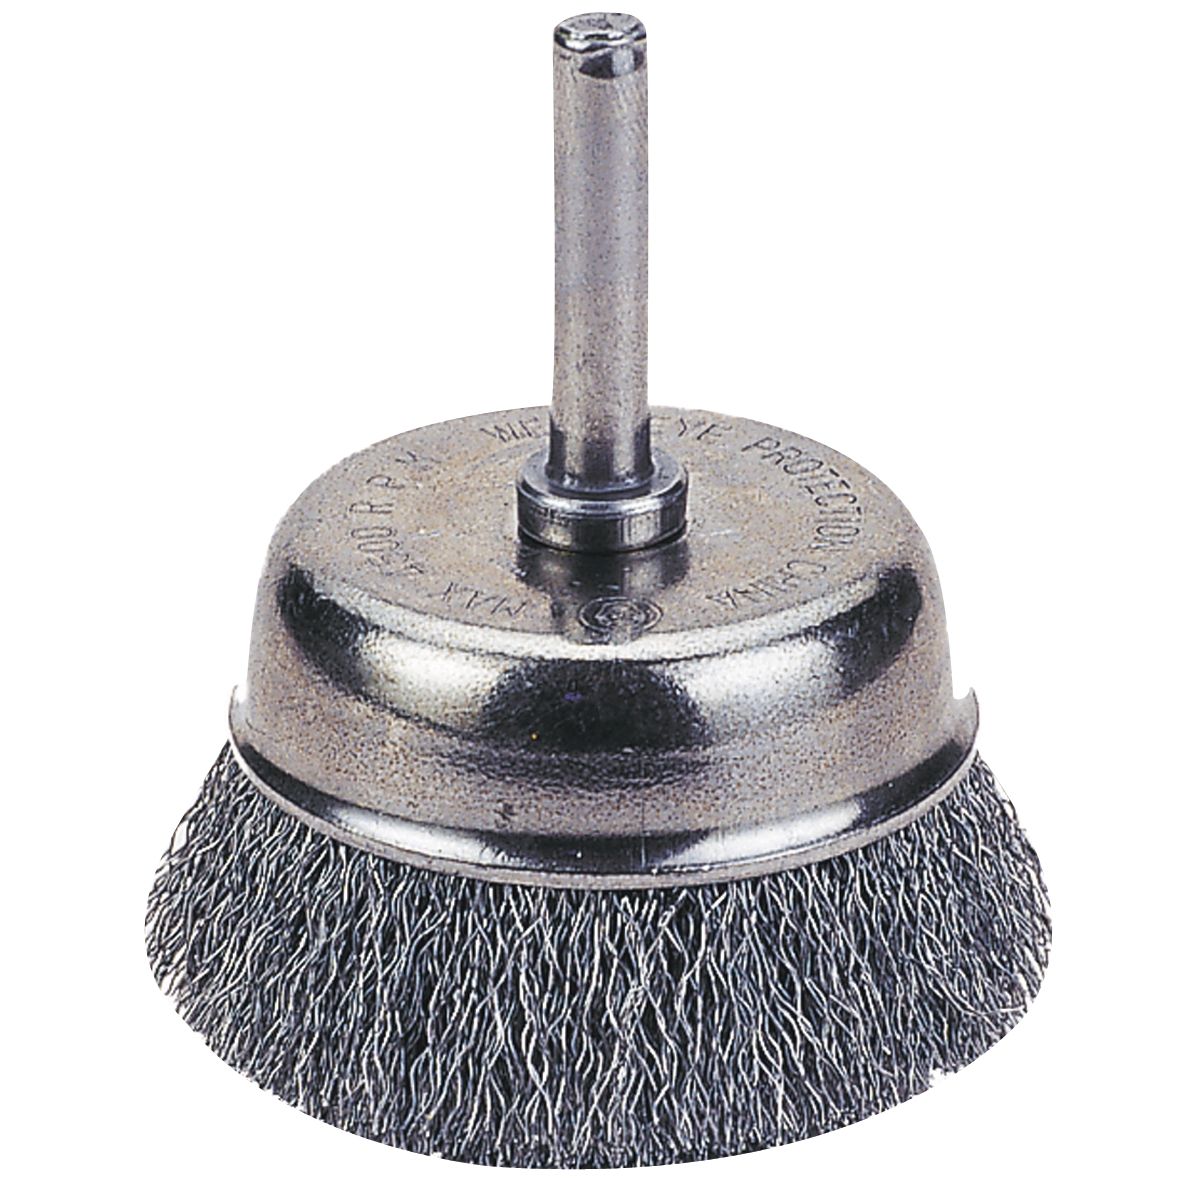 CUP BRUSH 2 1/2" CRIMPED WIRE